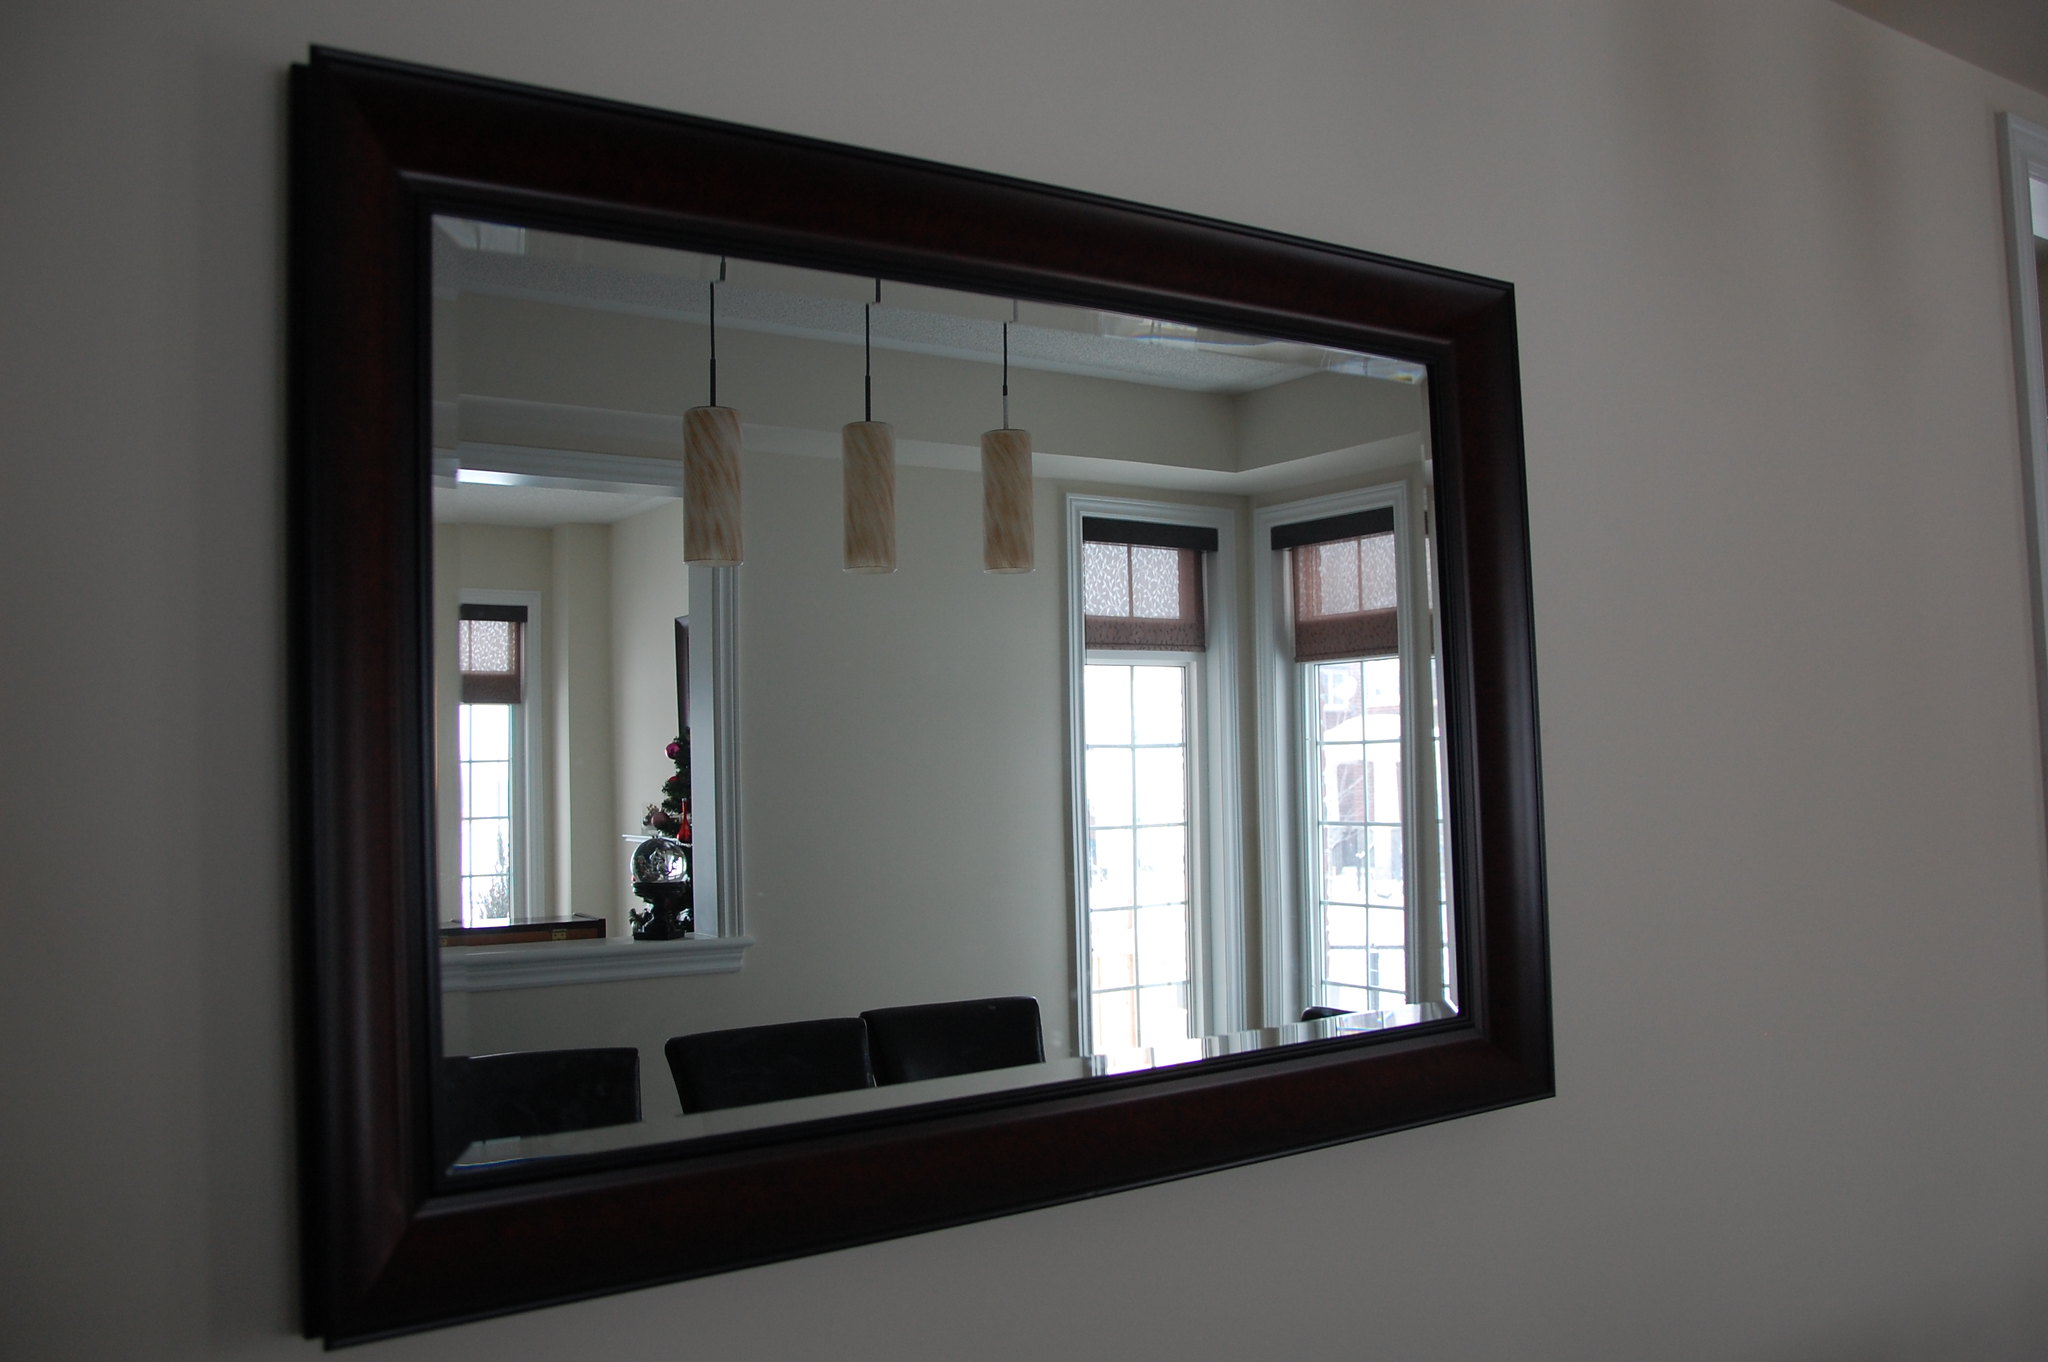 How to Make a Mirror Frame: Simple Woodworking Plans